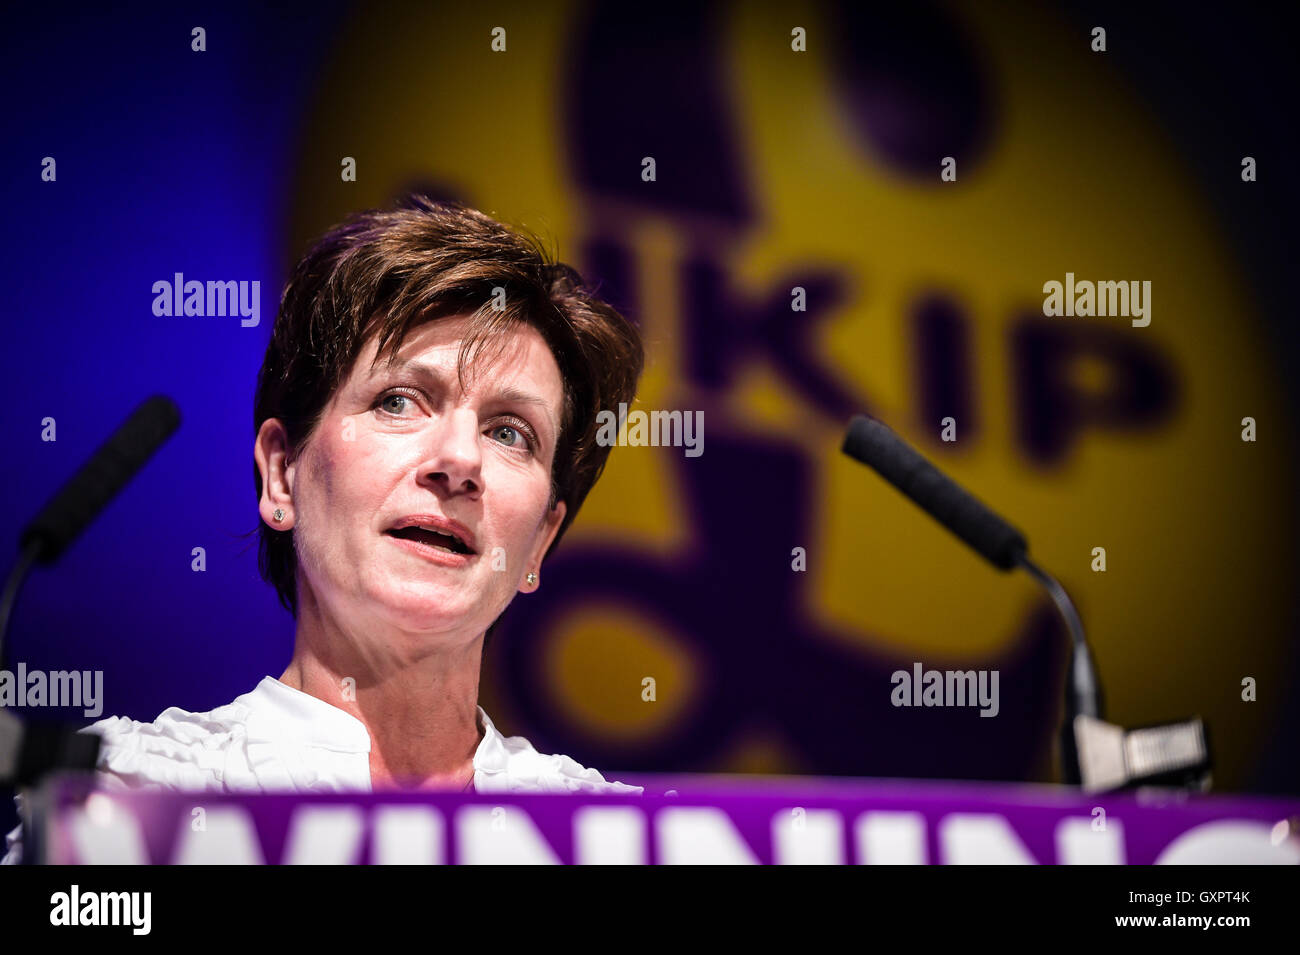 Ukip leader Diane James introduces Douglas Carswell (not pictured) before he addressees the Ukip conference in Bournemouth. Stock Photo